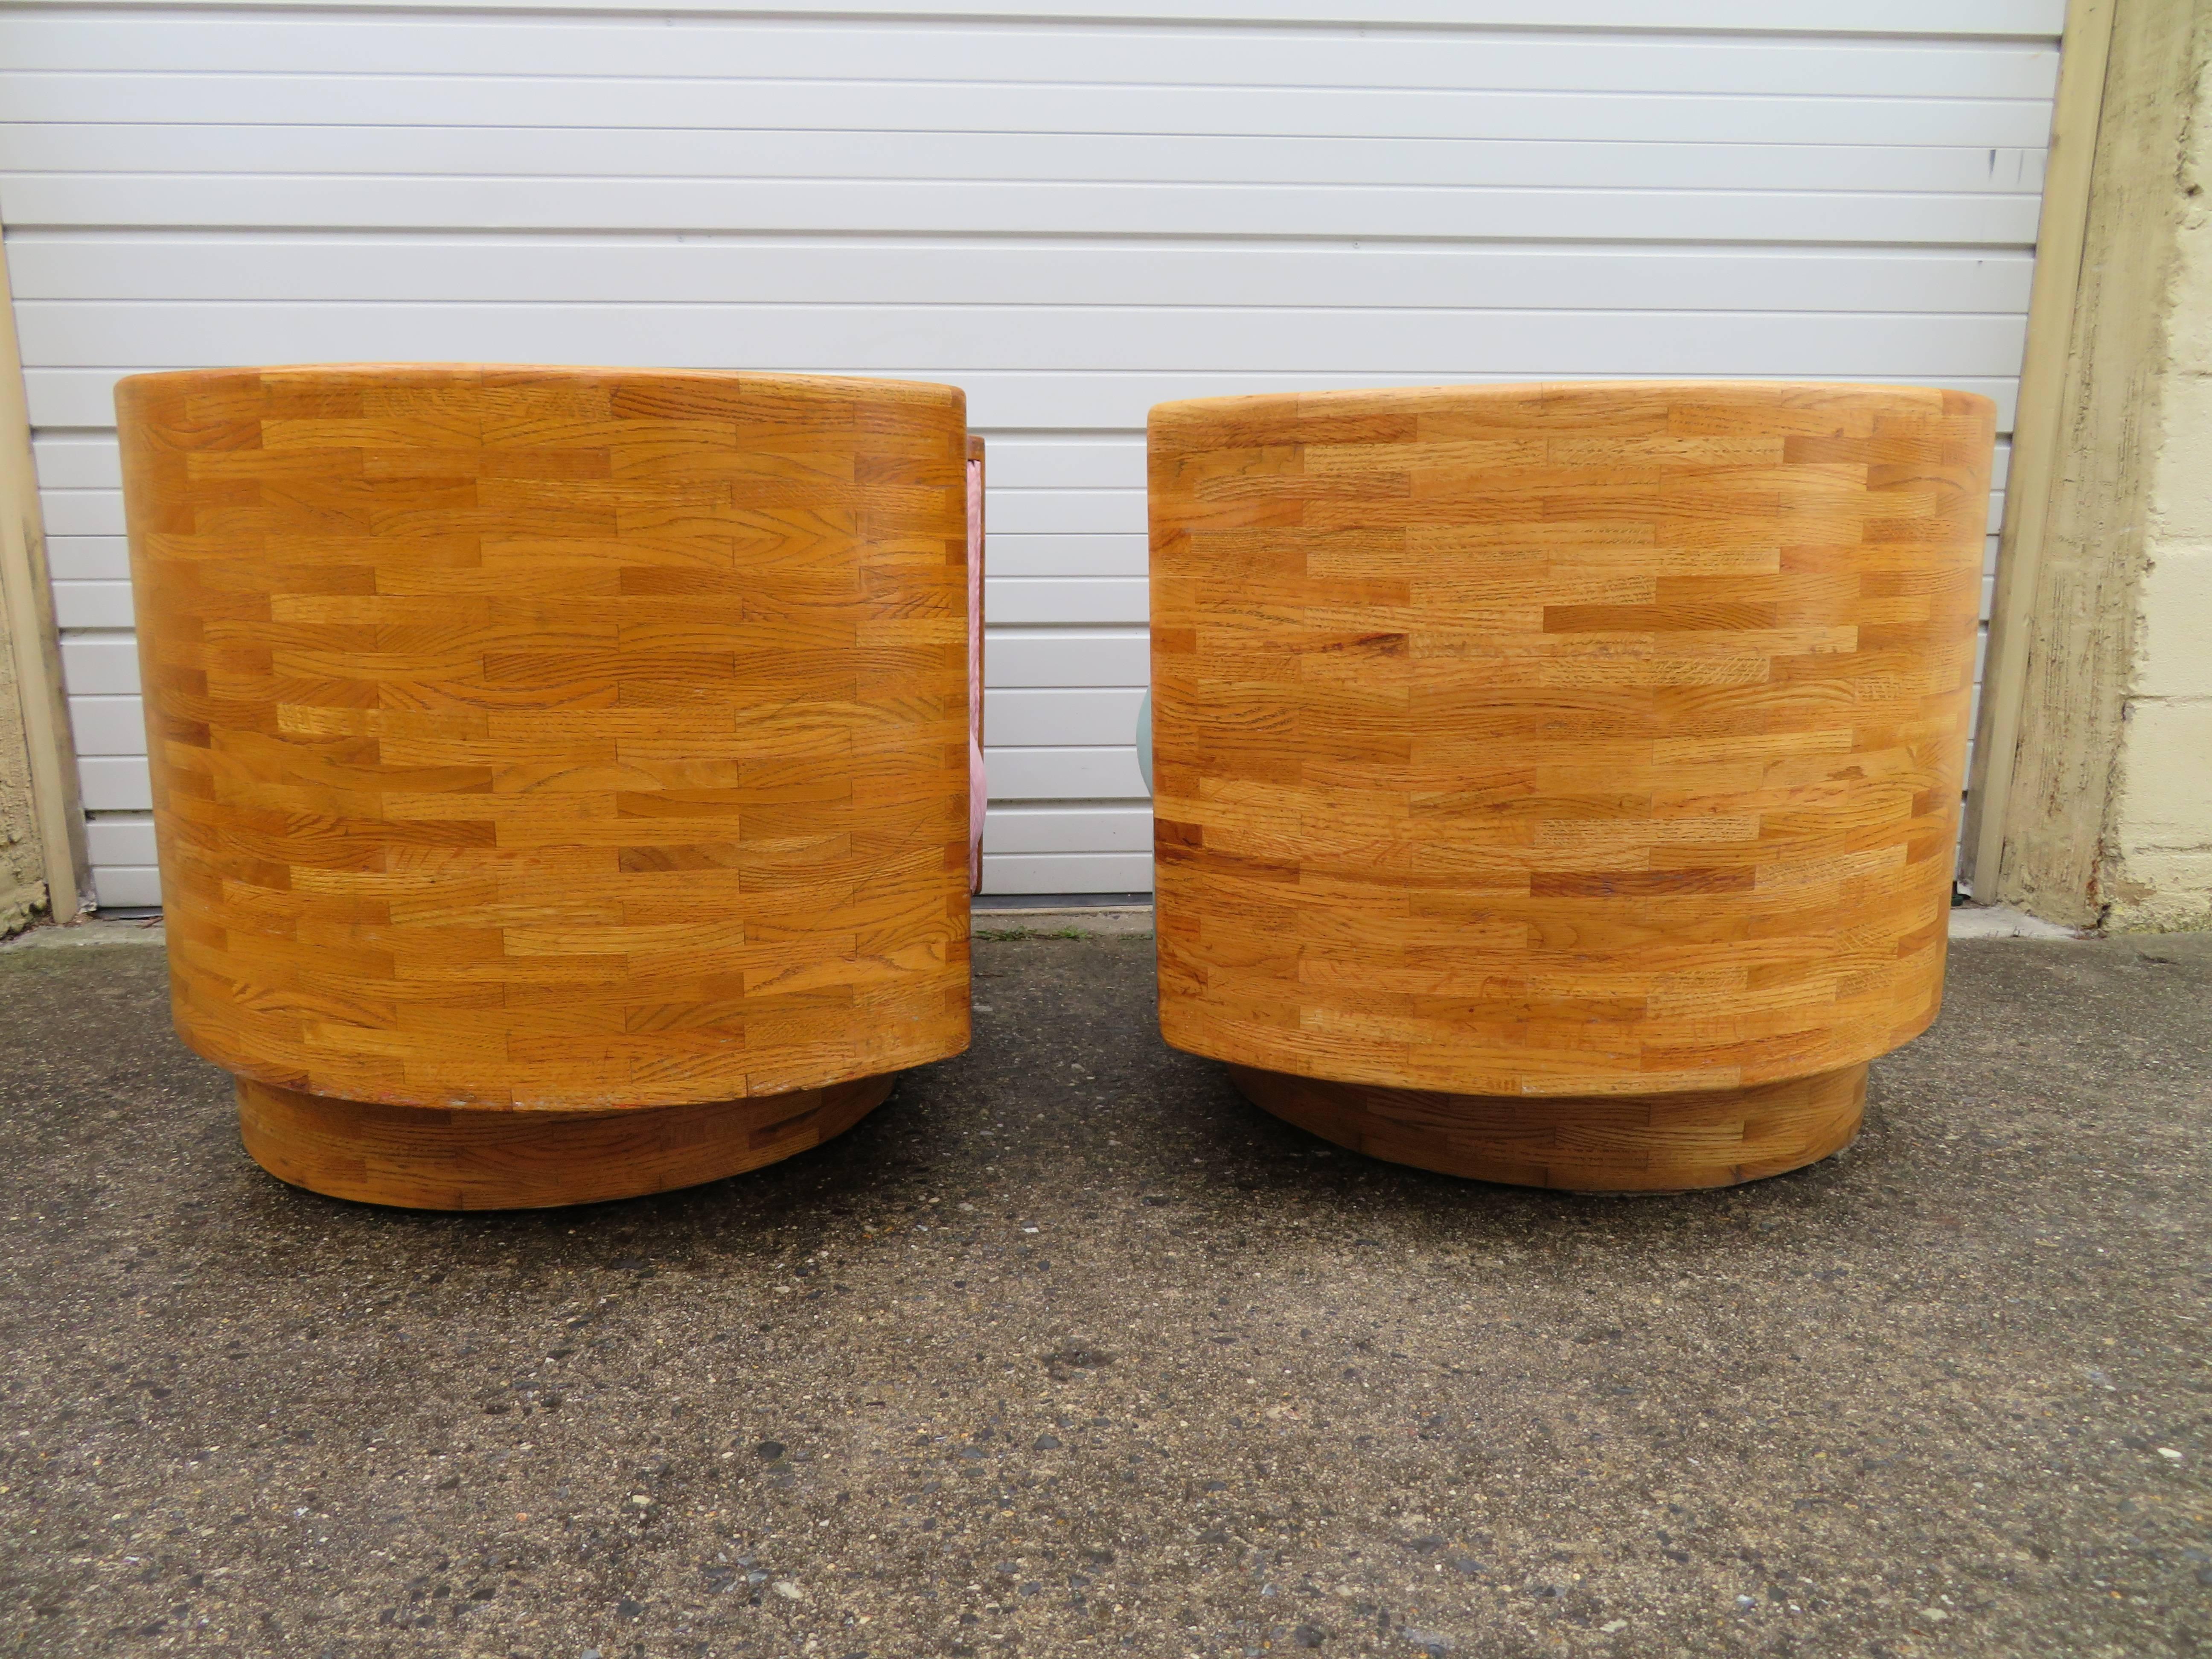 Unusual and rare pair of Milo Baughman style butcher block barrel back swivel chairs. This is the first pair of these solid wood chairs we have ever seen. Made like a butcher block table with solid maple-these chairs are super wide and heavy. The